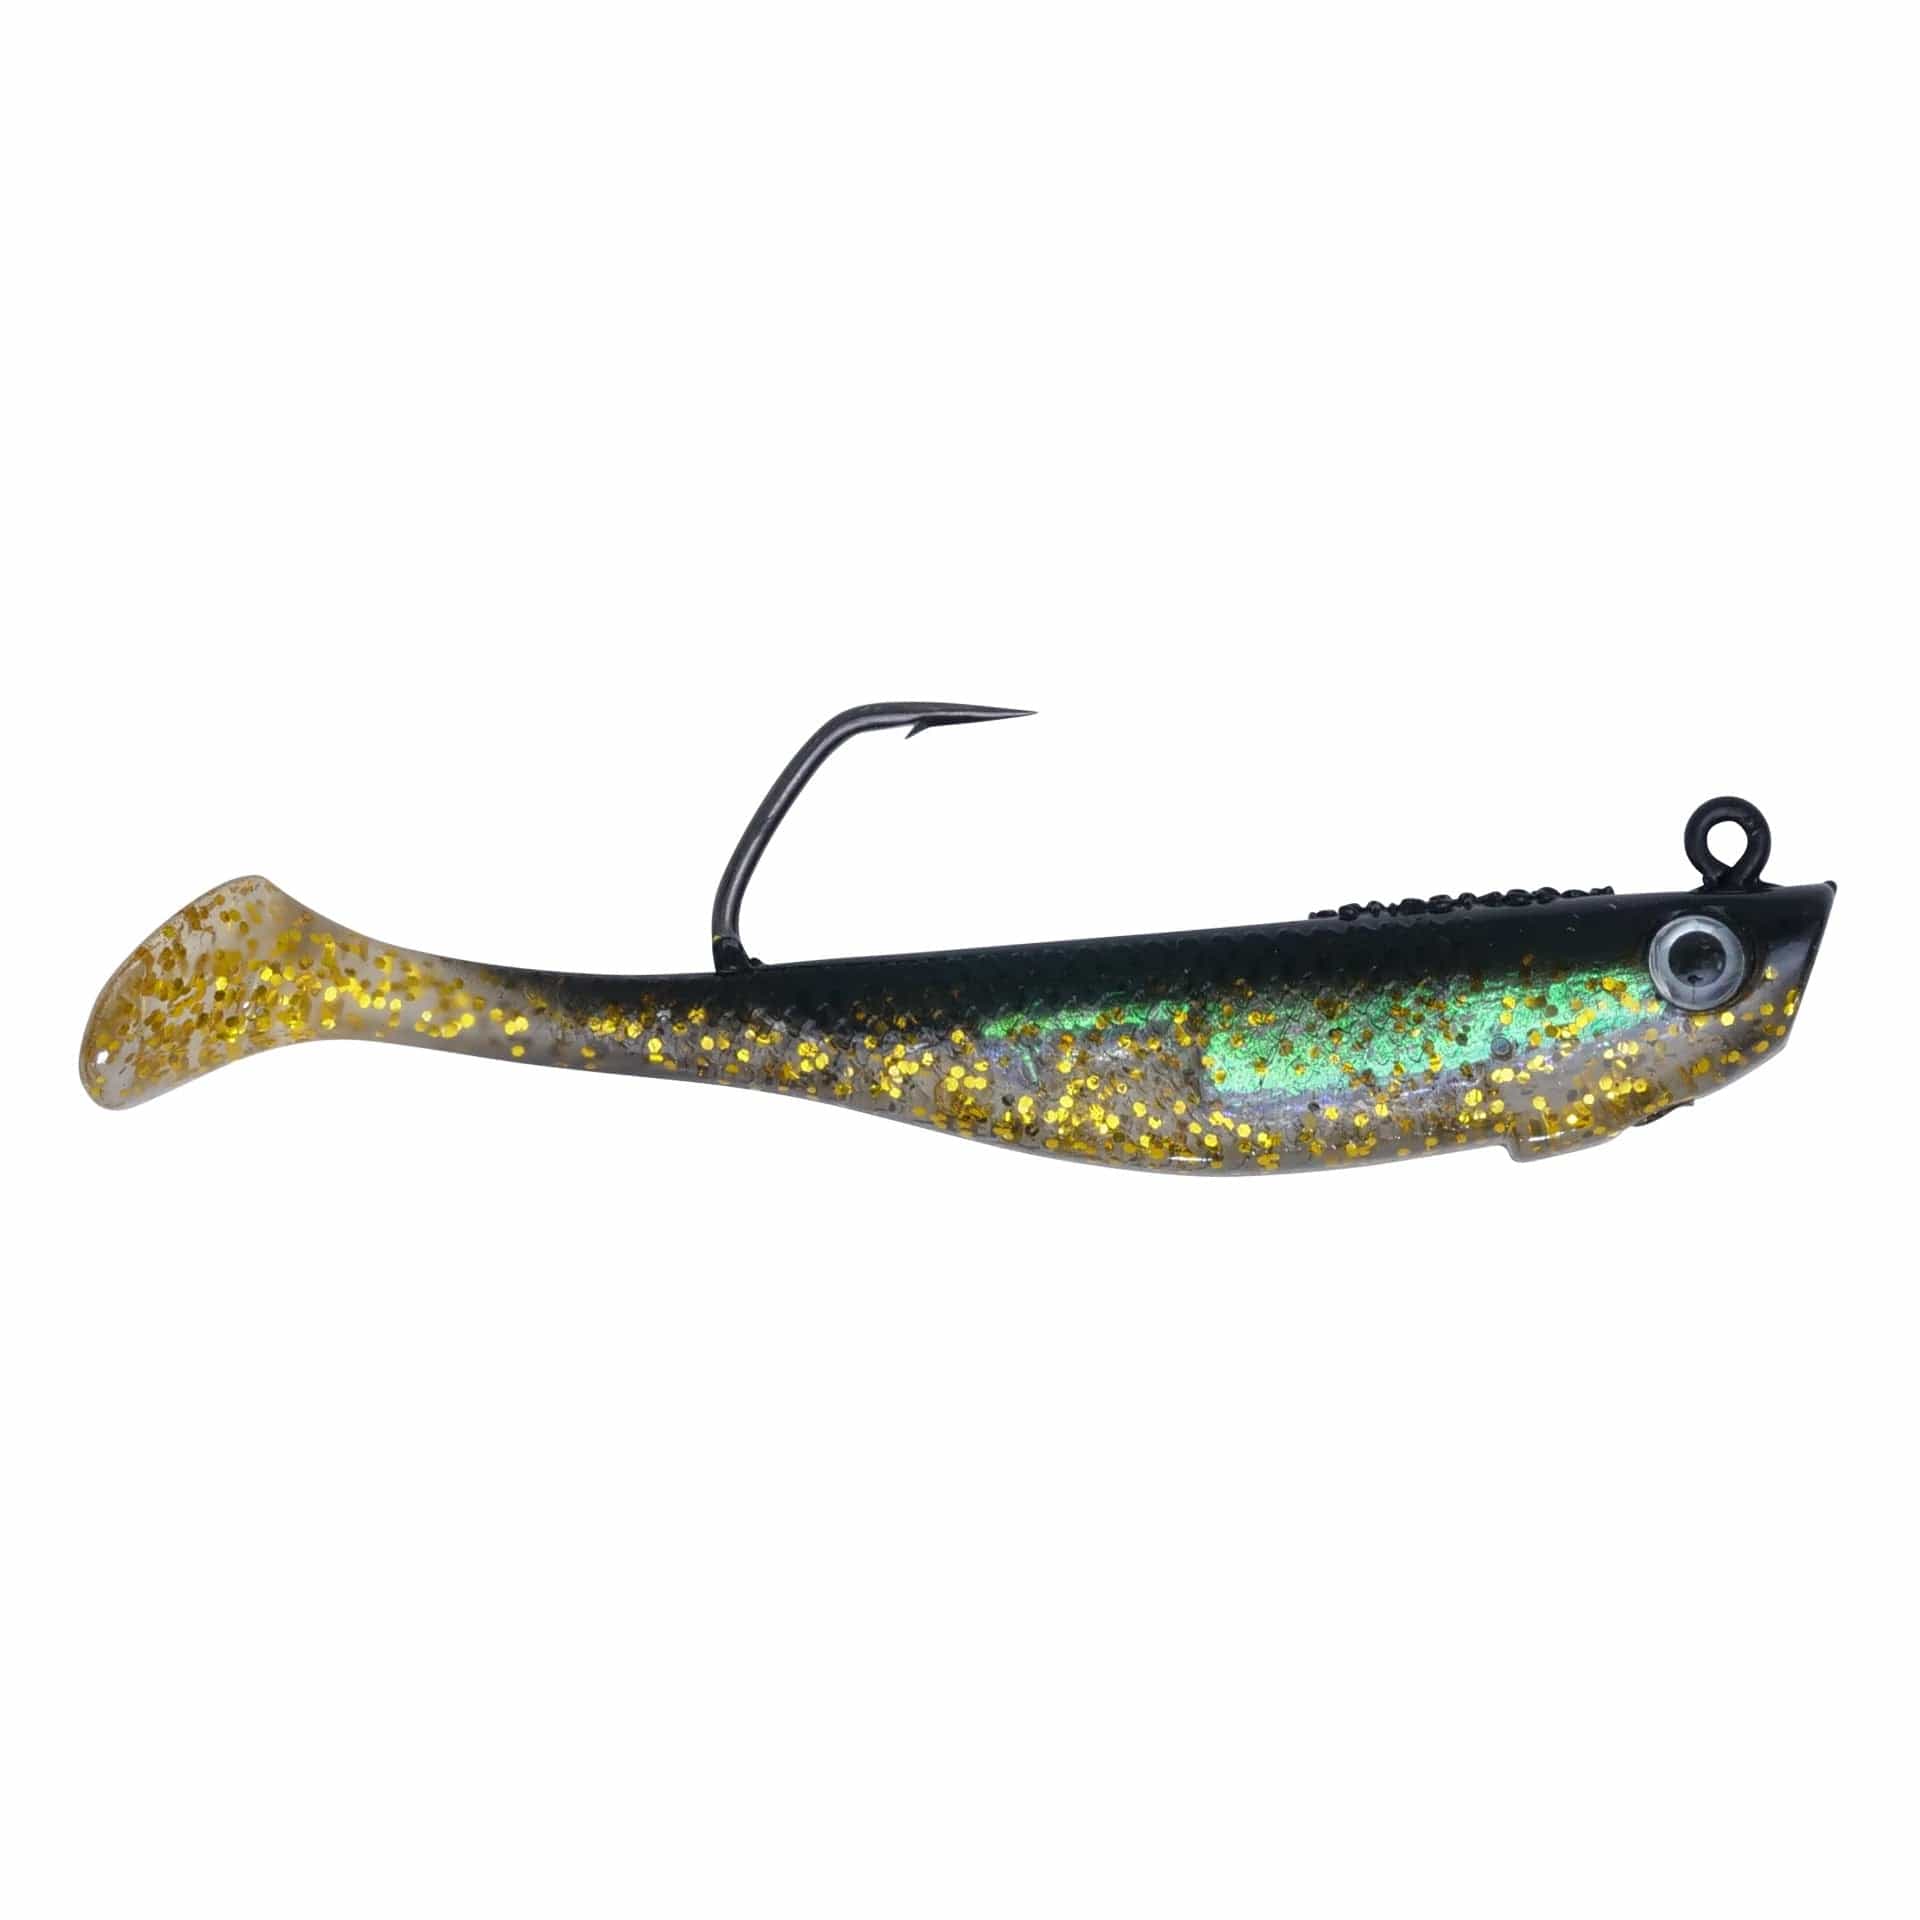 NEW PADDLETAIL LURE (with scales that make saltwater fish go crazy)! 